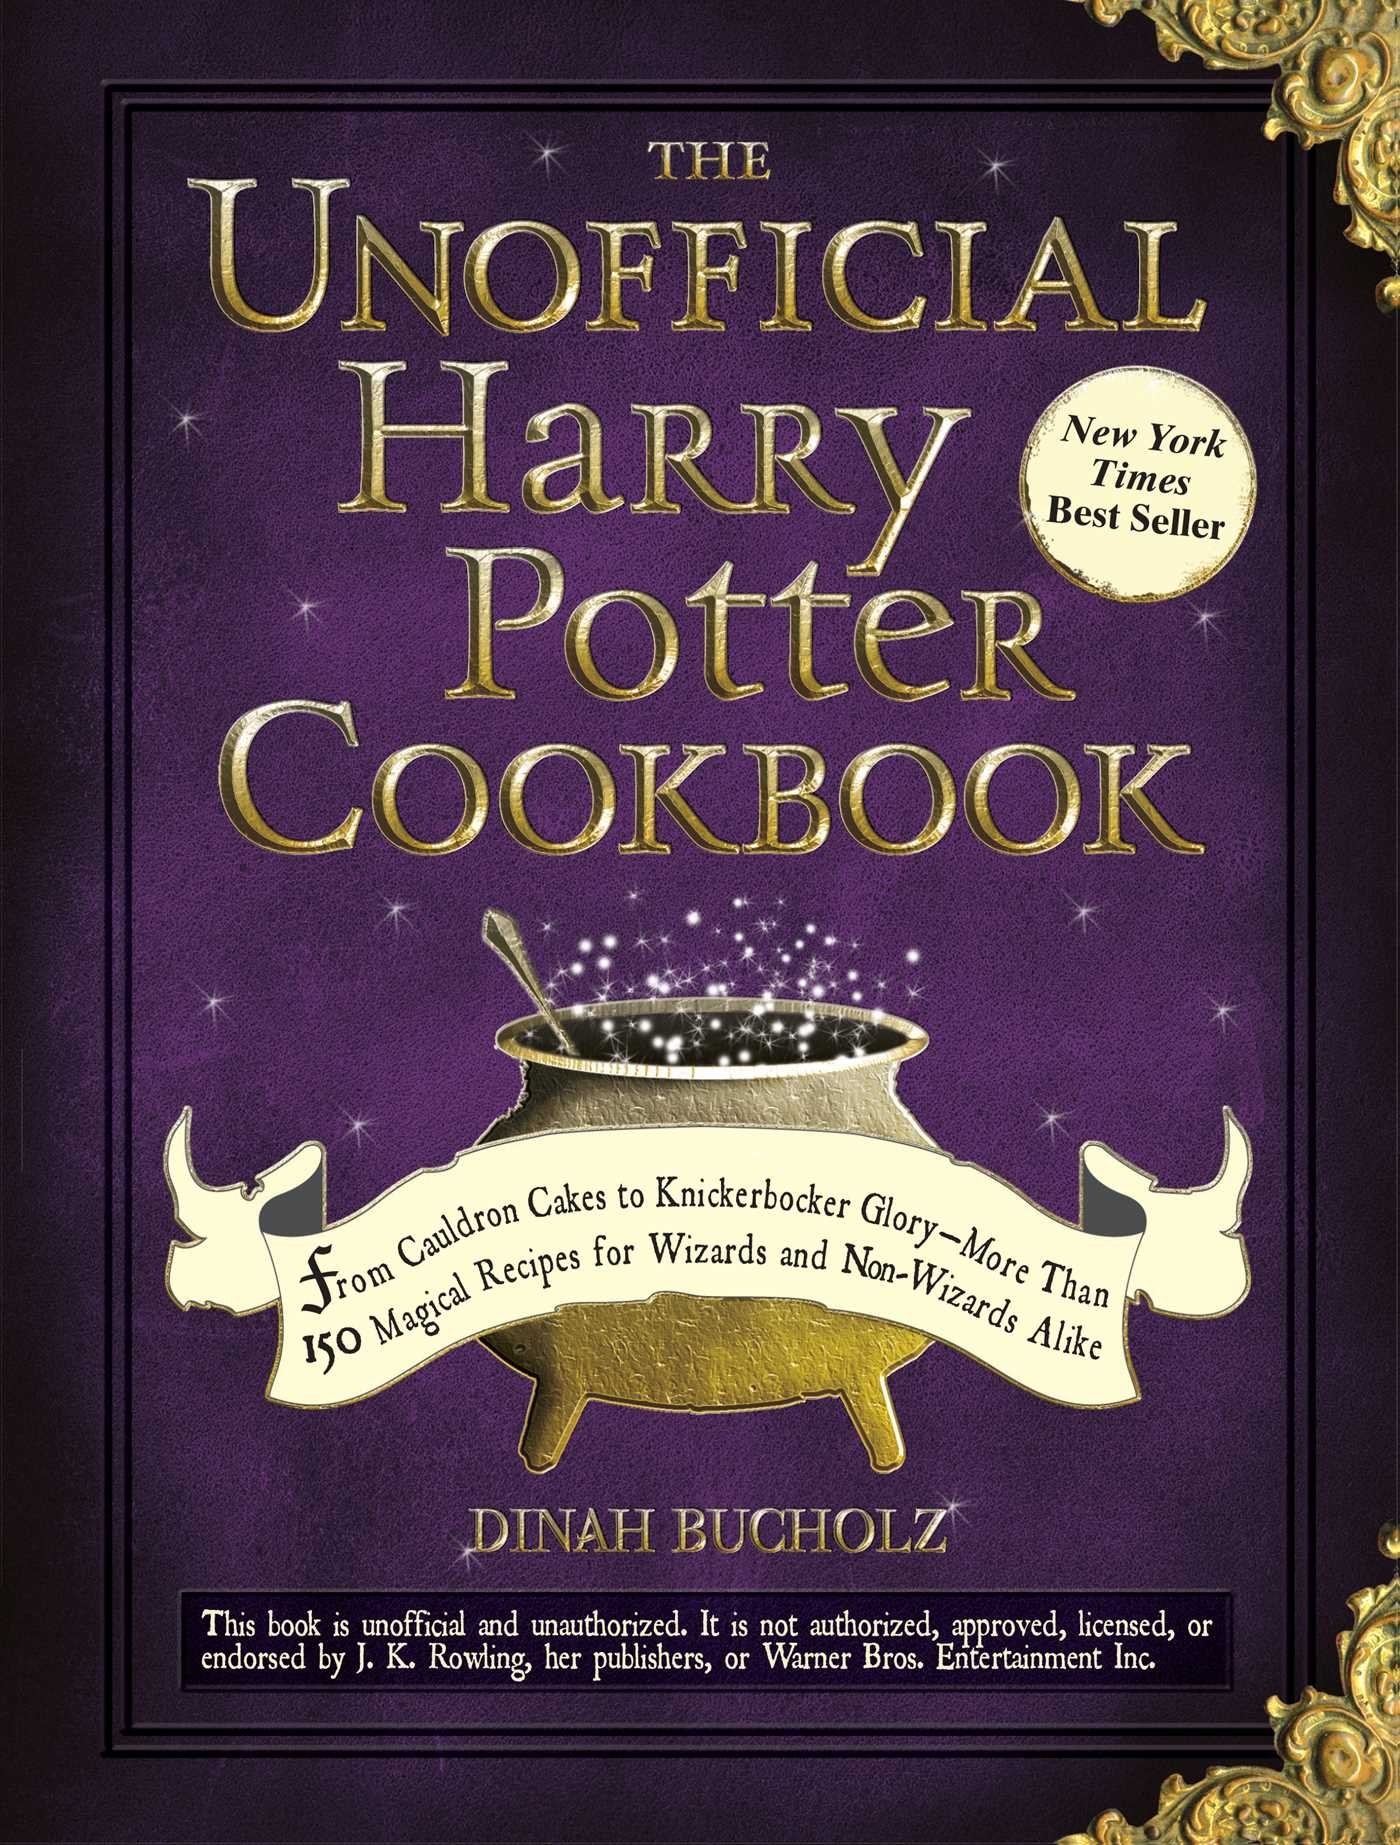 Cover of the unofficial harry potter cookbook